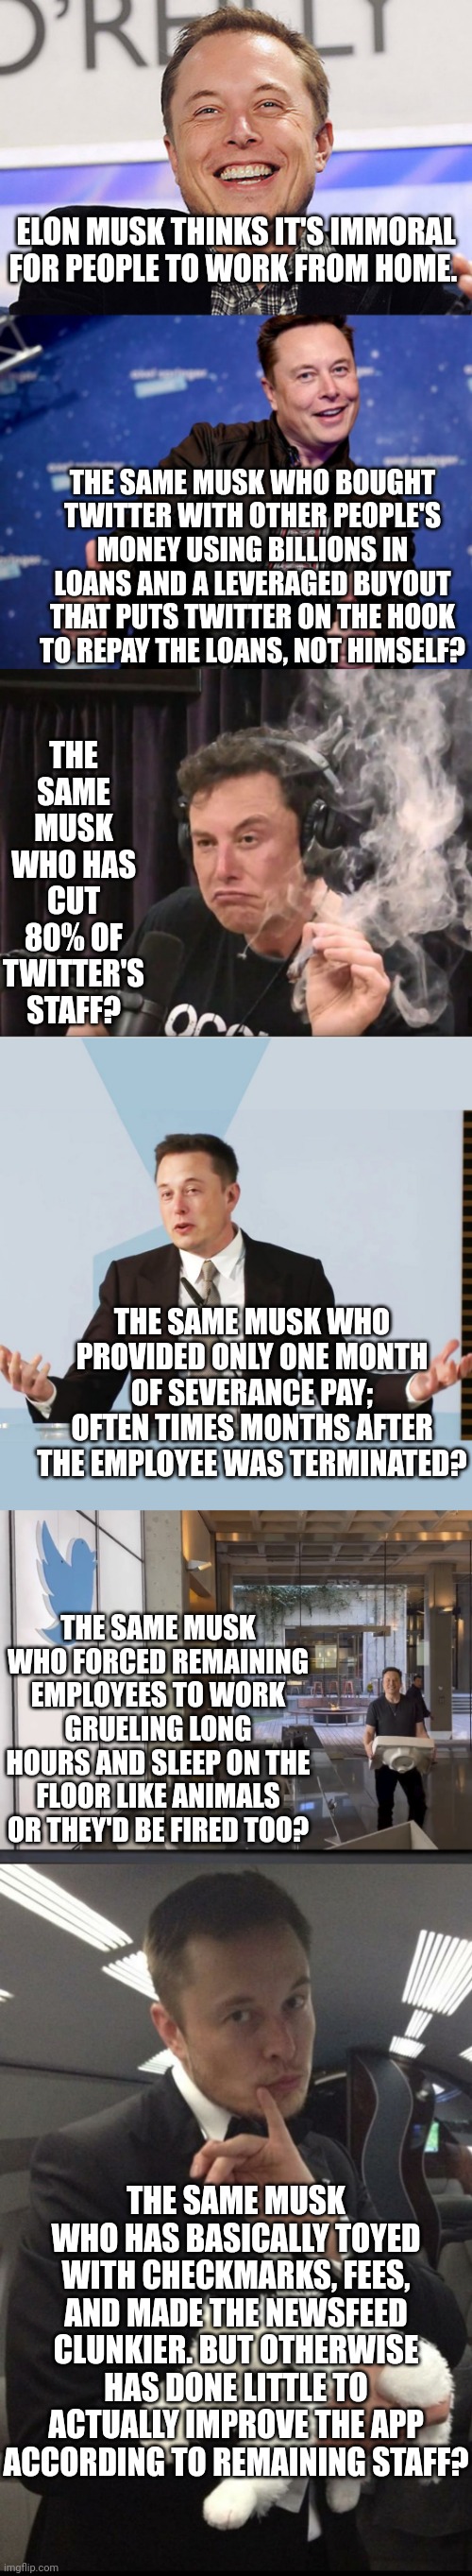 I love it when a billionaire, who has a long history of treating staff like slaves, complains about working from home. | ELON MUSK THINKS IT'S IMMORAL FOR PEOPLE TO WORK FROM HOME. THE SAME MUSK WHO BOUGHT TWITTER WITH OTHER PEOPLE'S MONEY USING BILLIONS IN LOANS AND A LEVERAGED BUYOUT THAT PUTS TWITTER ON THE HOOK TO REPAY THE LOANS, NOT HIMSELF? THE SAME MUSK WHO HAS CUT 80% OF TWITTER'S STAFF? THE SAME MUSK WHO PROVIDED ONLY ONE MONTH OF SEVERANCE PAY; OFTEN TIMES MONTHS AFTER THE EMPLOYEE WAS TERMINATED? THE SAME MUSK WHO FORCED REMAINING EMPLOYEES TO WORK GRUELING LONG HOURS AND SLEEP ON THE FLOOR LIKE ANIMALS OR THEY'D BE FIRED TOO? THE SAME MUSK WHO HAS BASICALLY TOYED WITH CHECKMARKS, FEES, AND MADE THE NEWSFEED CLUNKIER. BUT OTHERWISE HAS DONE LITTLE TO ACTUALLY IMPROVE THE APP ACCORDING TO REMAINING STAFF? | image tagged in elon musk,working,bad ideas,employees,hypocrisy,get a life | made w/ Imgflip meme maker